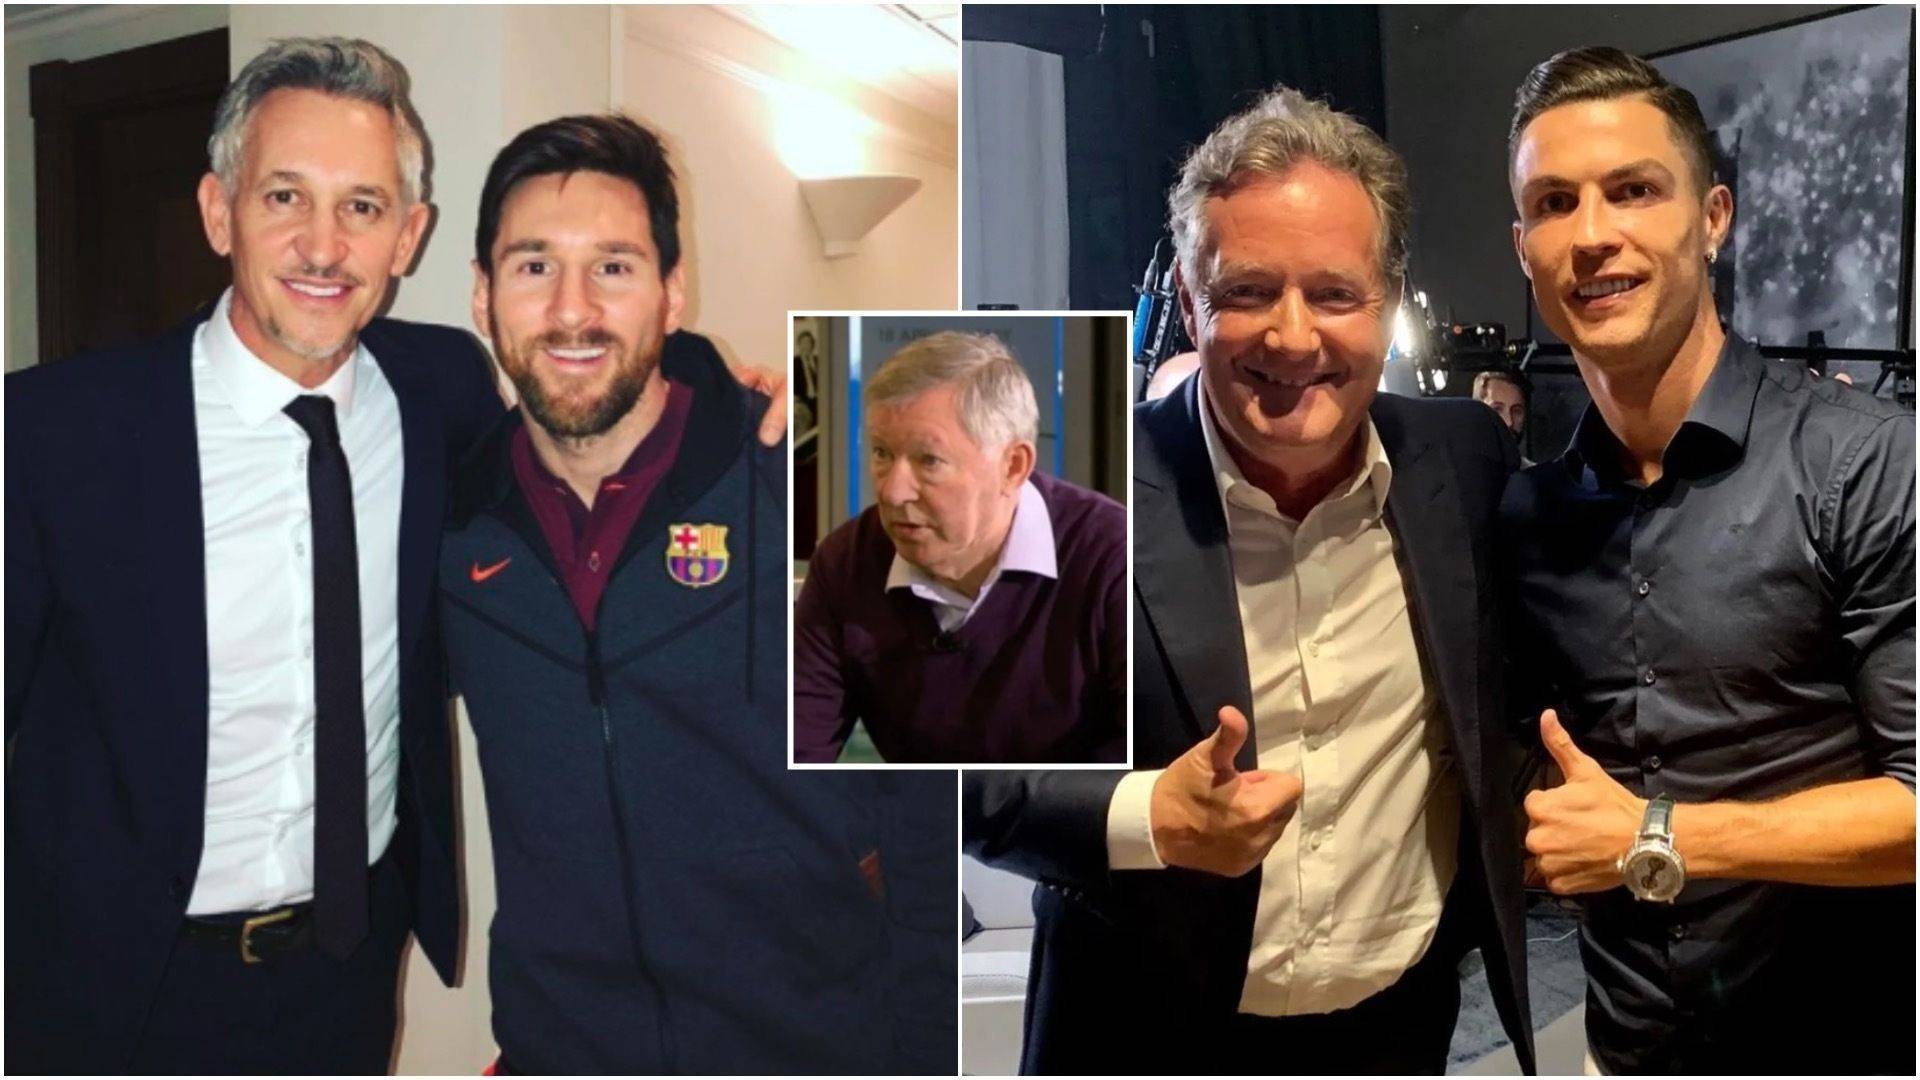 Gary Lineker calls Fergie’s Ronaldo v Messi opinion ‘nonsensical’ - gets into spat with Piers Morgan